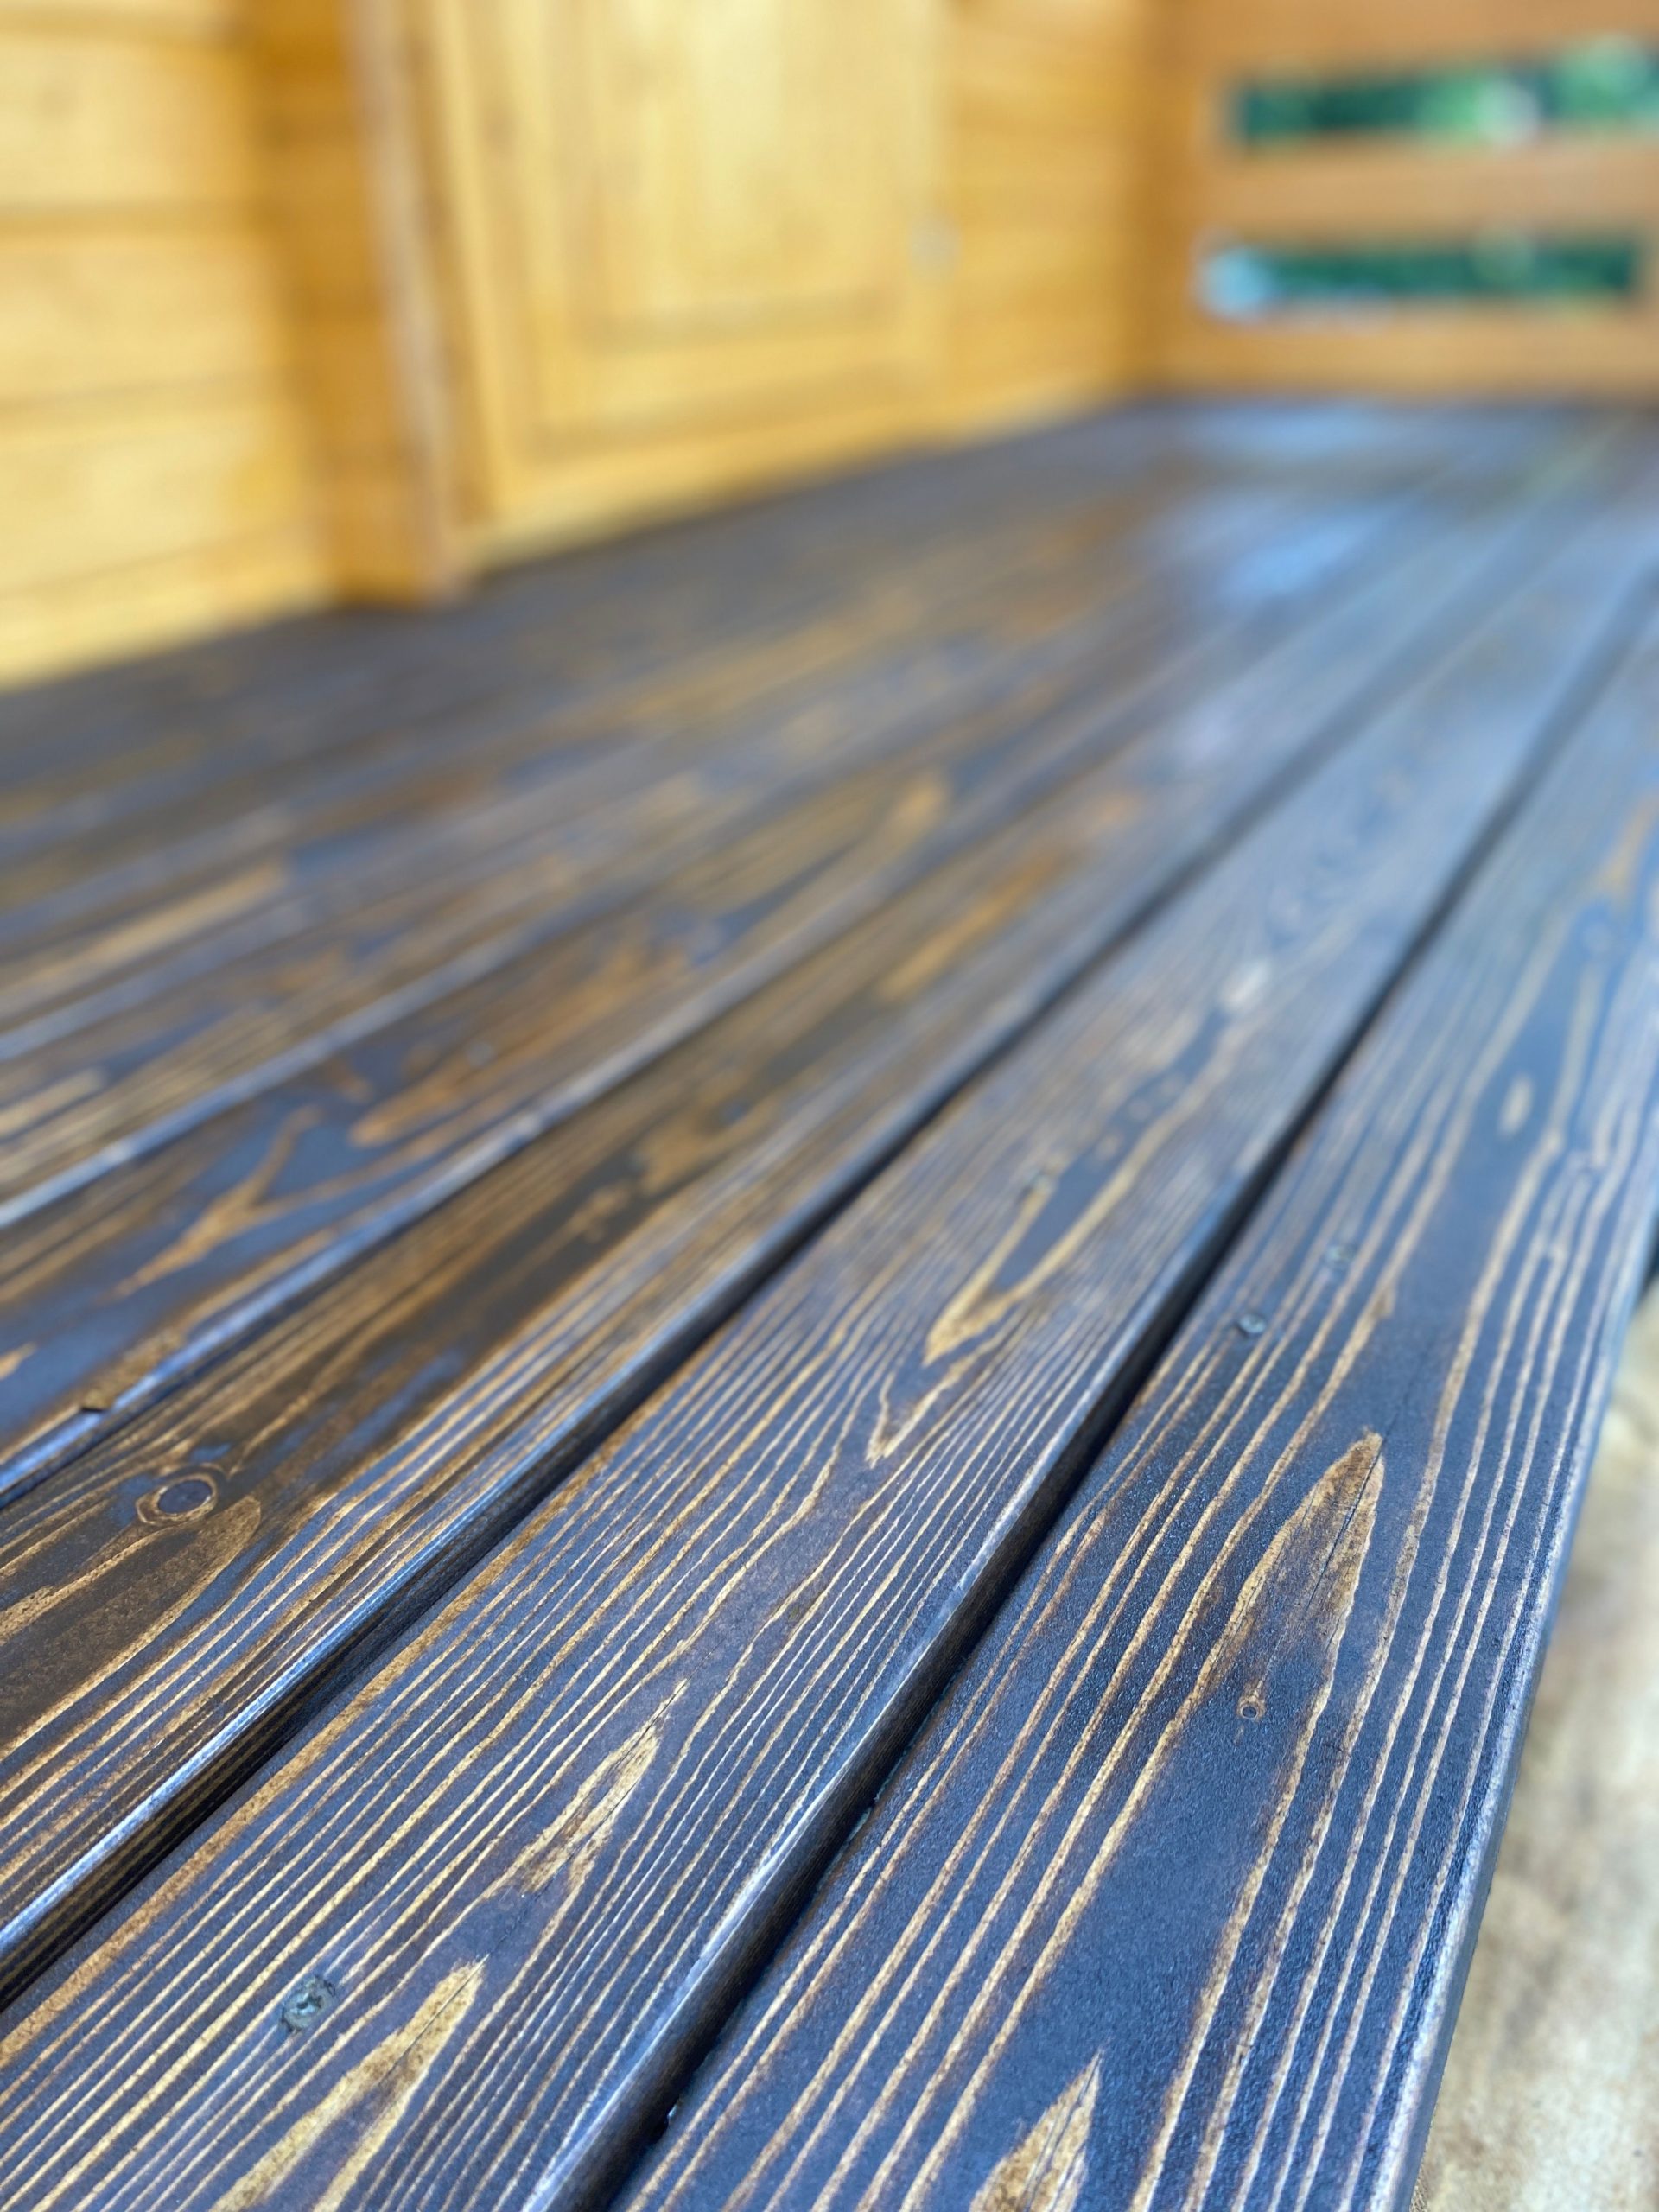 What Is Ipe Wood and Why People Love It for Decks